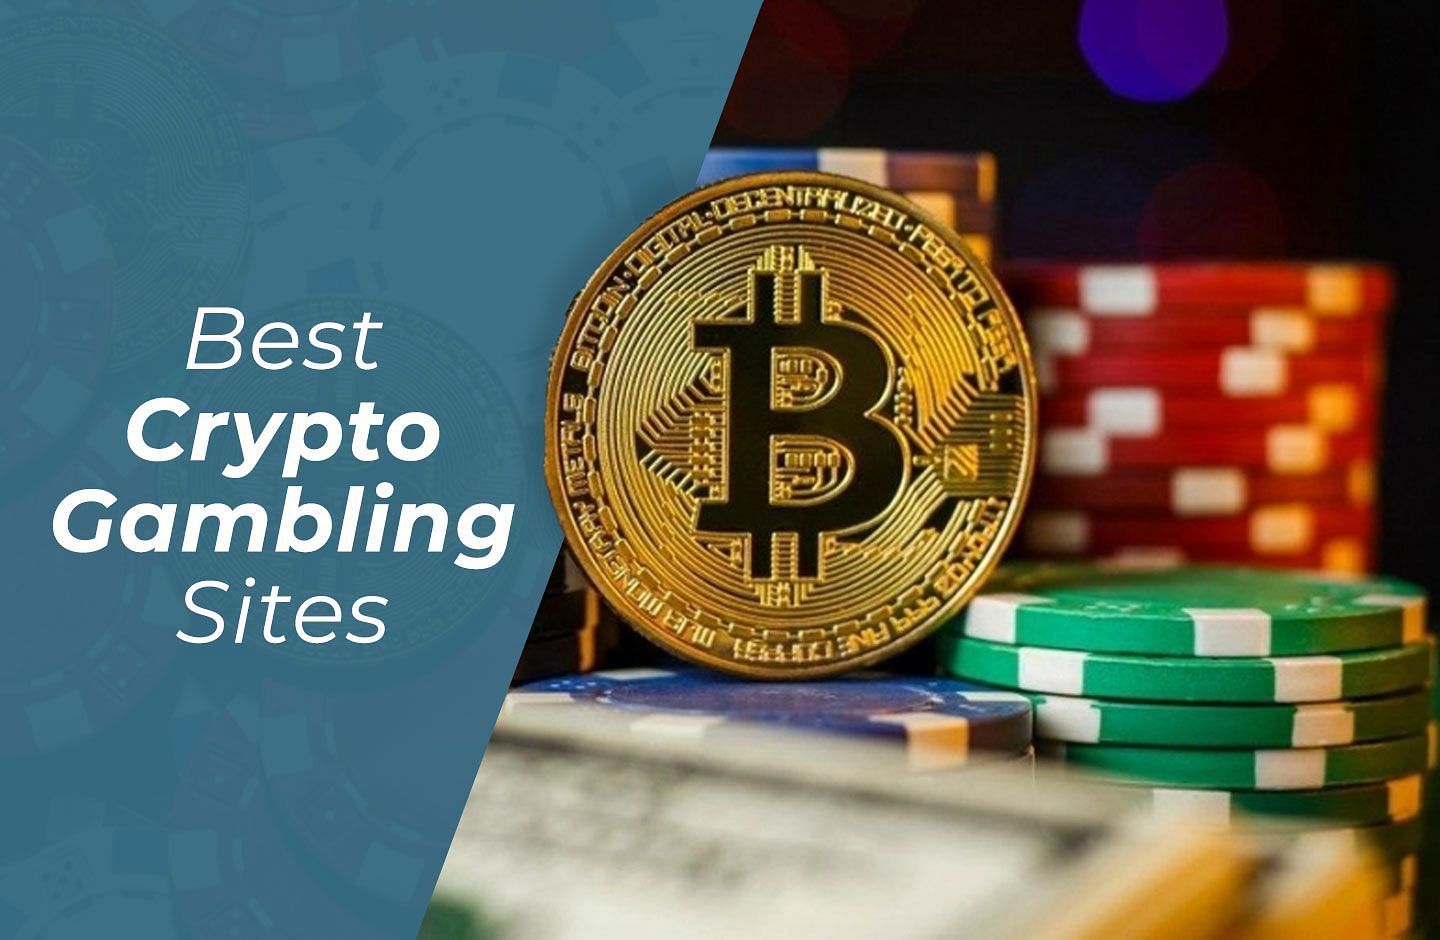 Want More Out Of Your Life? play casino with bitcoin 2023, play casino with bitcoin 2023, play casino with bitcoin 2023!